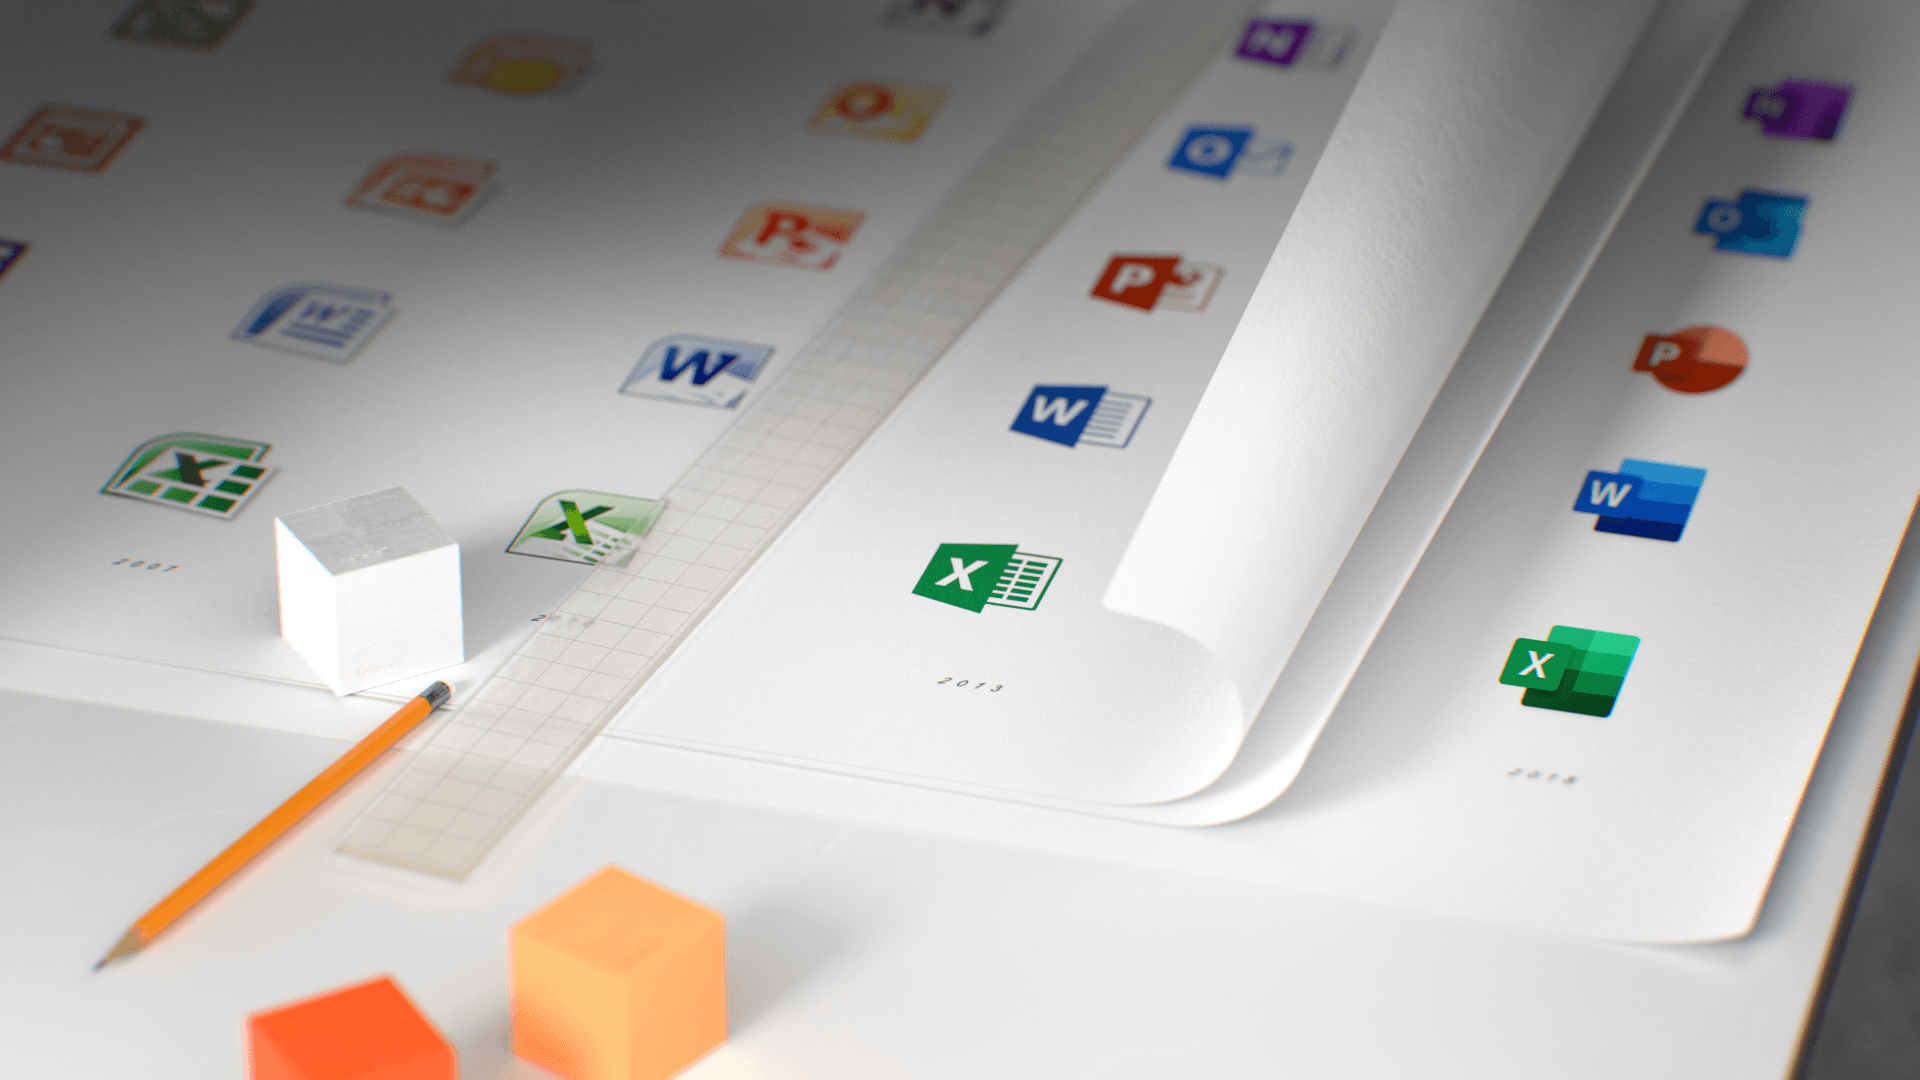 New Office Logo - Microsoft's new Office icons are part of a bigger design overhaul